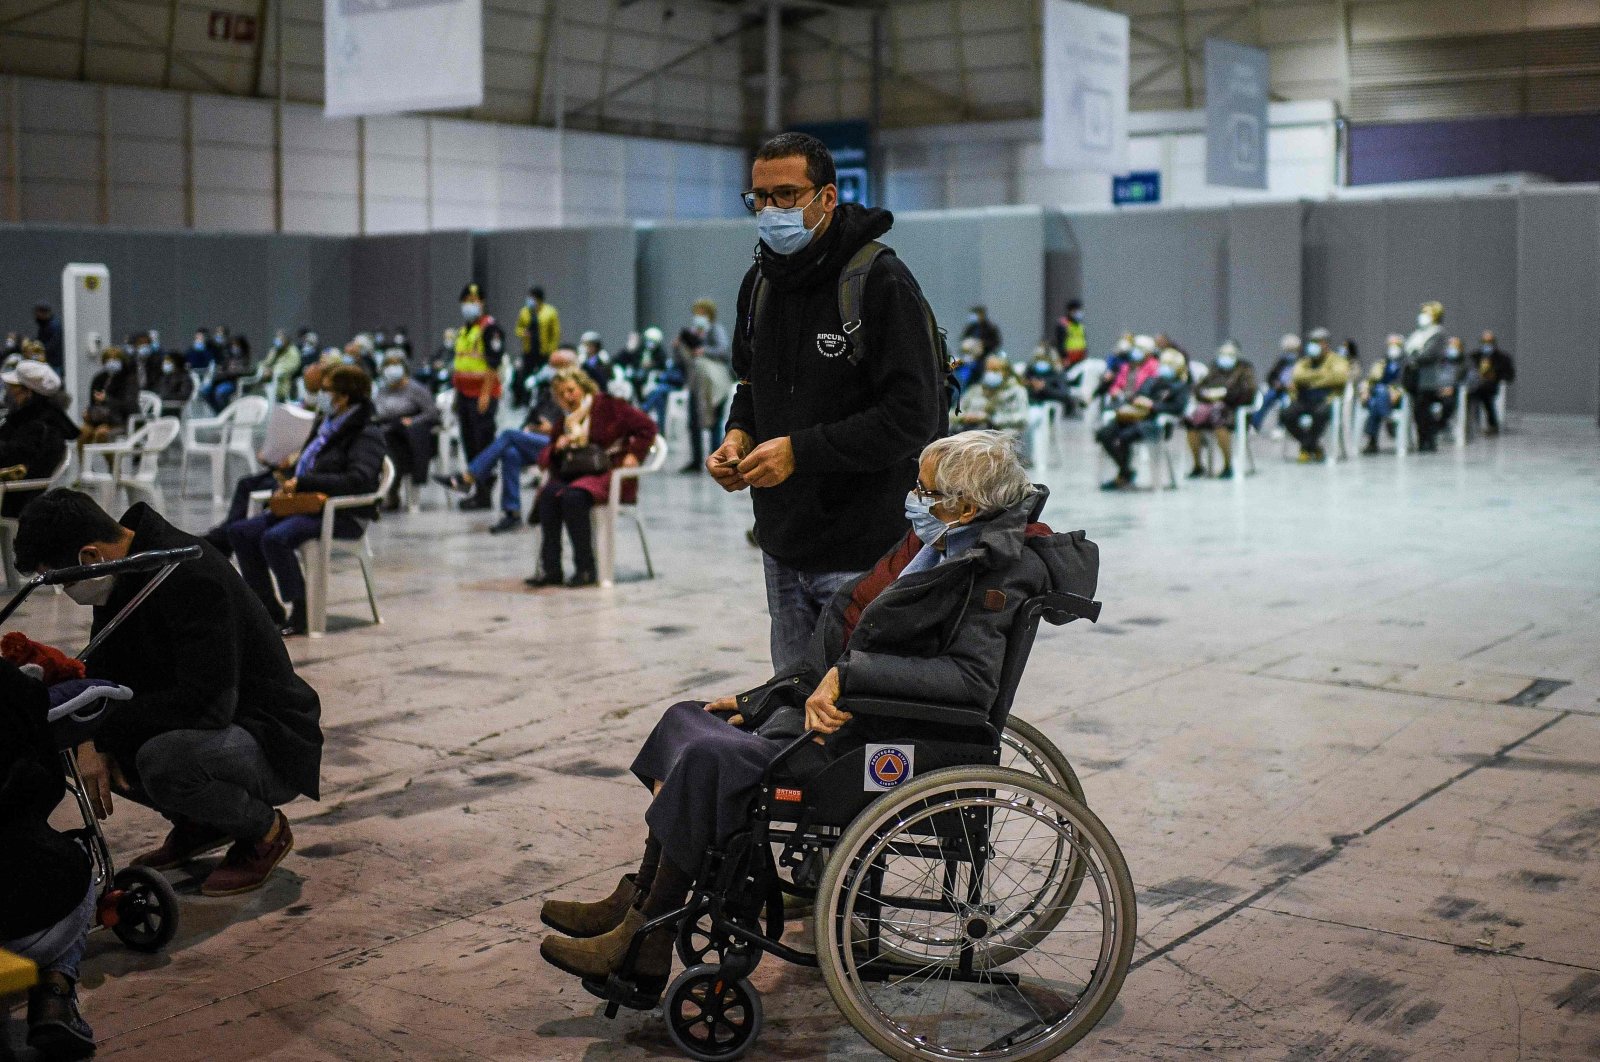 A woman in a wheelchair waits to receive a dose of a COVID-19 vaccine, at the vaccination center of Parque das Nacoes, Lisbon, Portugal, Dec. 1, 2021. (AFP Photo)